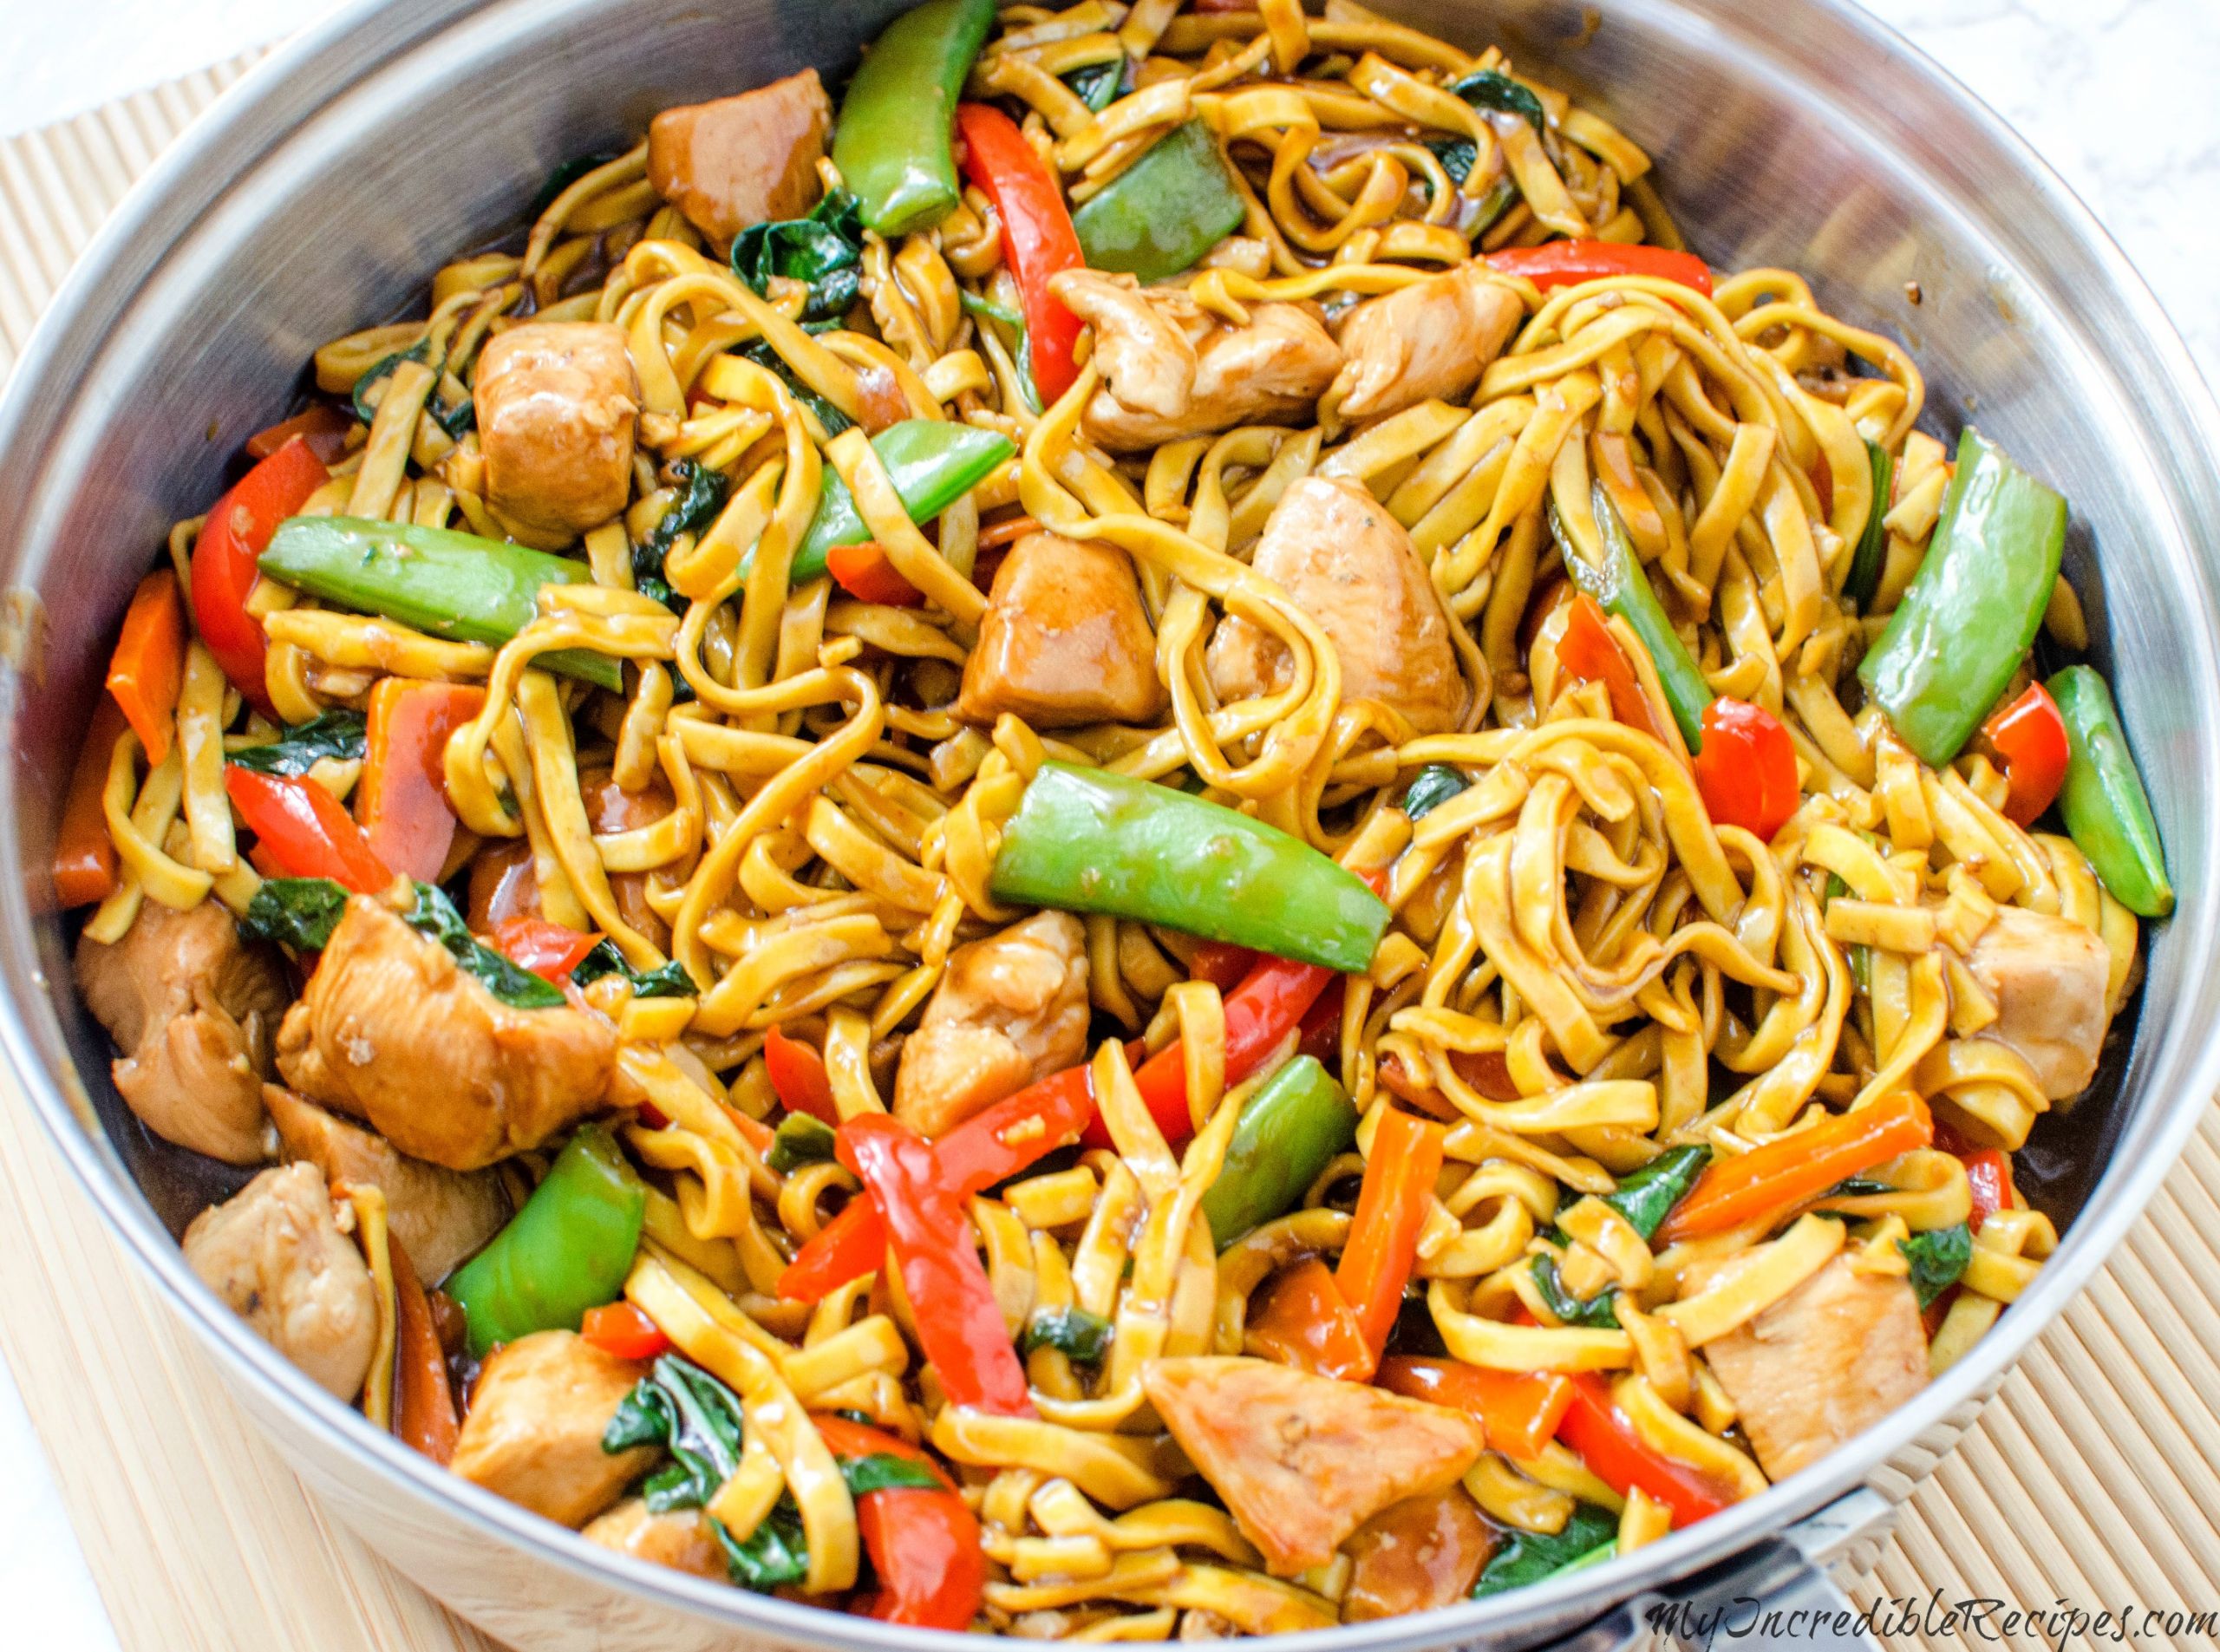 Recipe For Lo Mein Noodles
 Chicken Lo Mein – Homemade Takeout Style